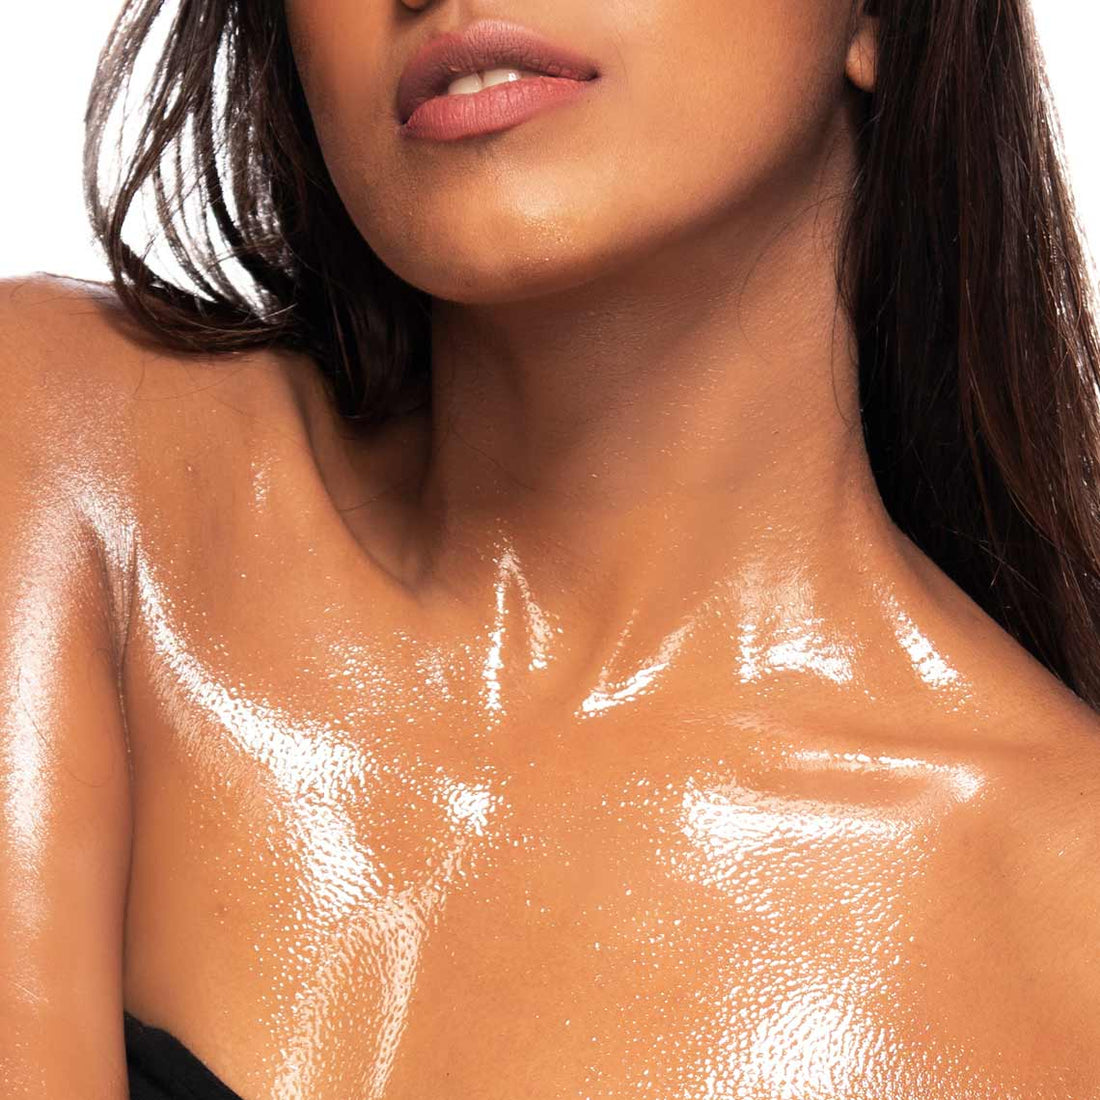 Know everything about body polishing oils